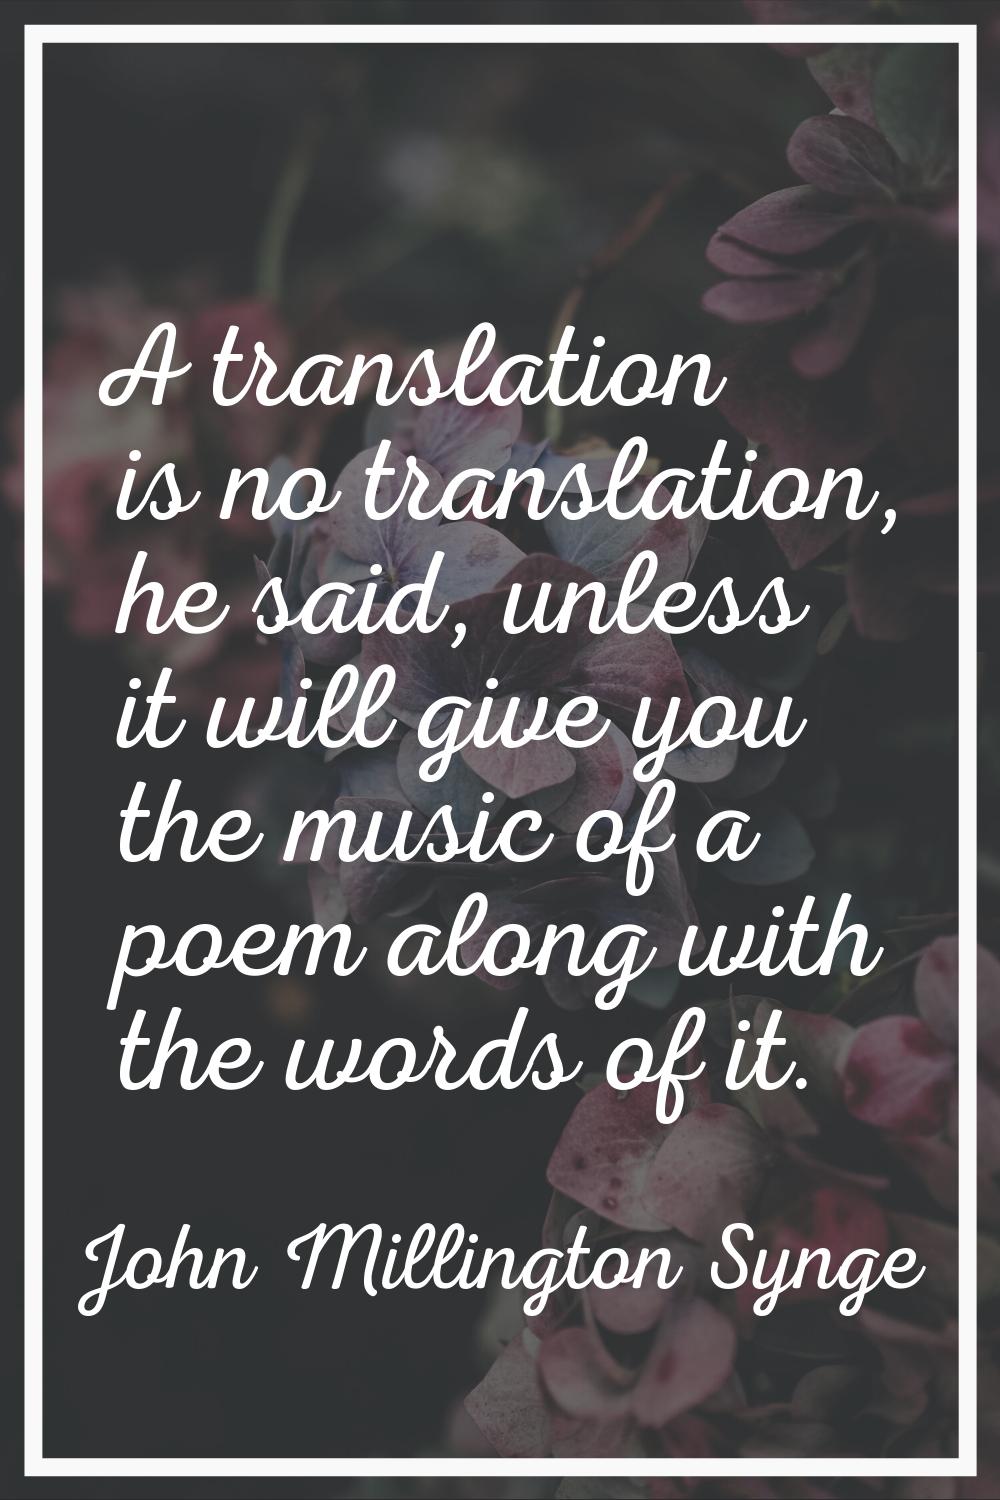 A translation is no translation, he said, unless it will give you the music of a poem along with th